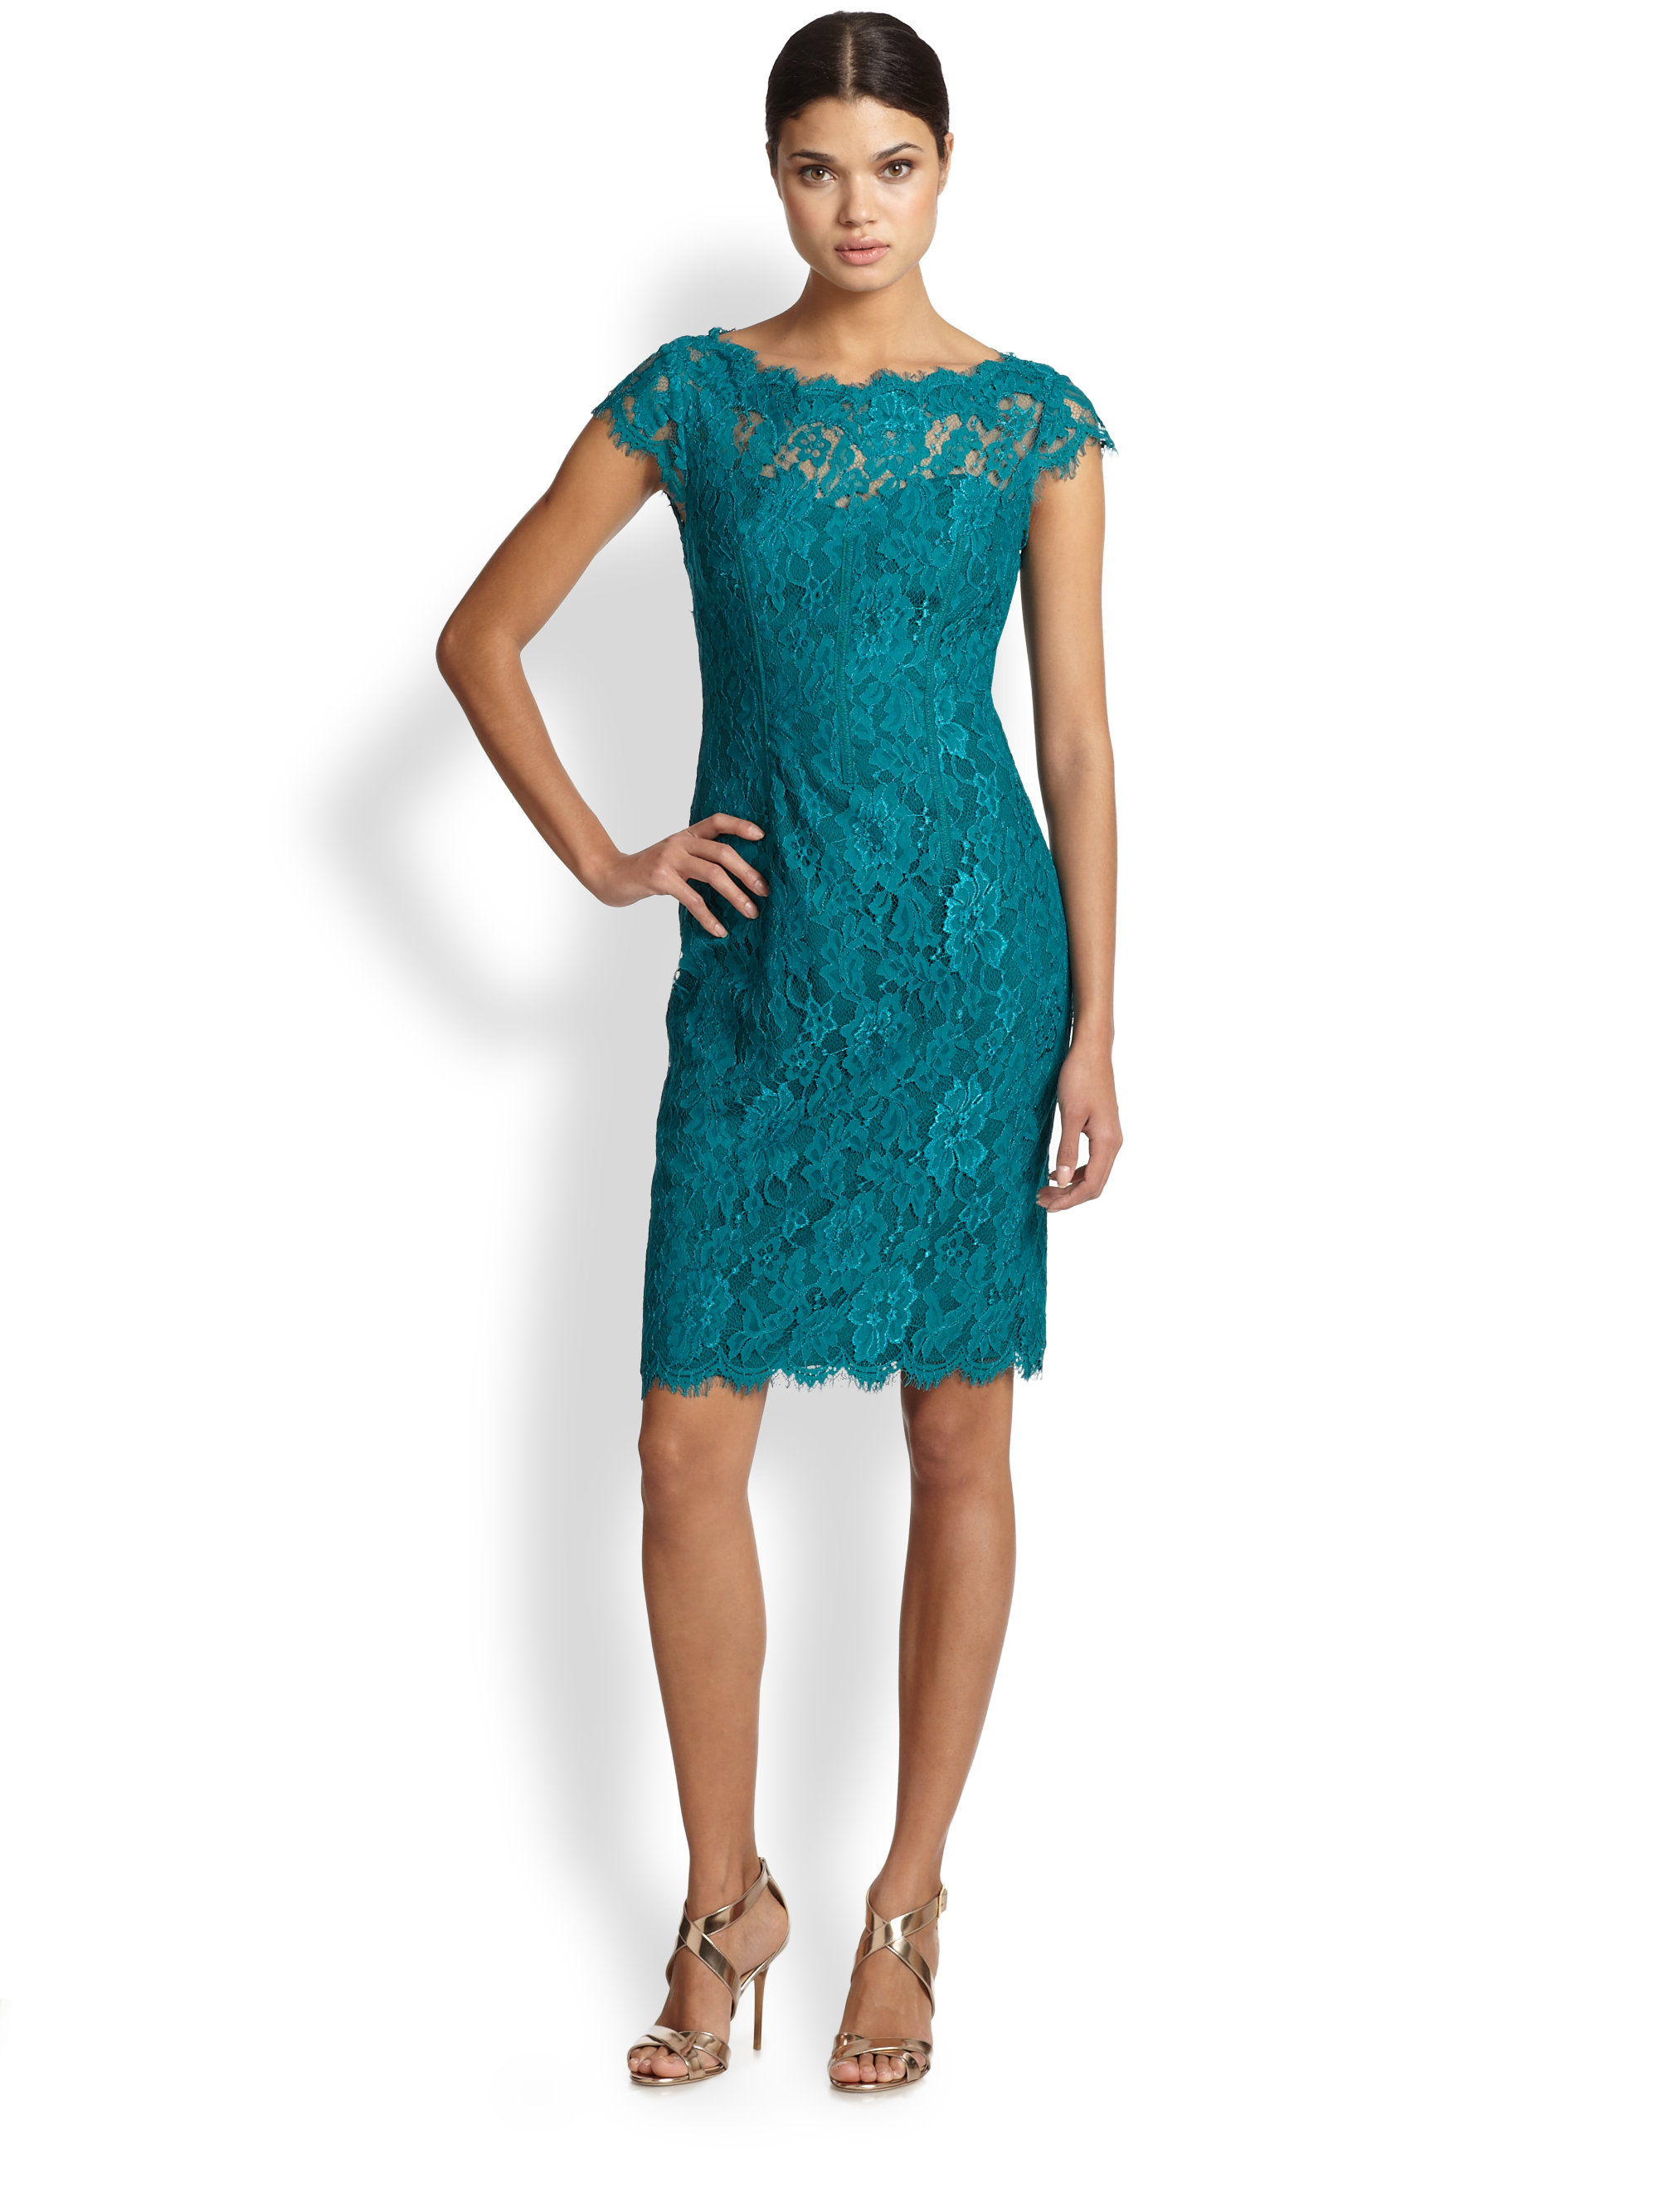 Lyst - Ml monique lhuillier Lace Sheath Cocktail Dress in Green